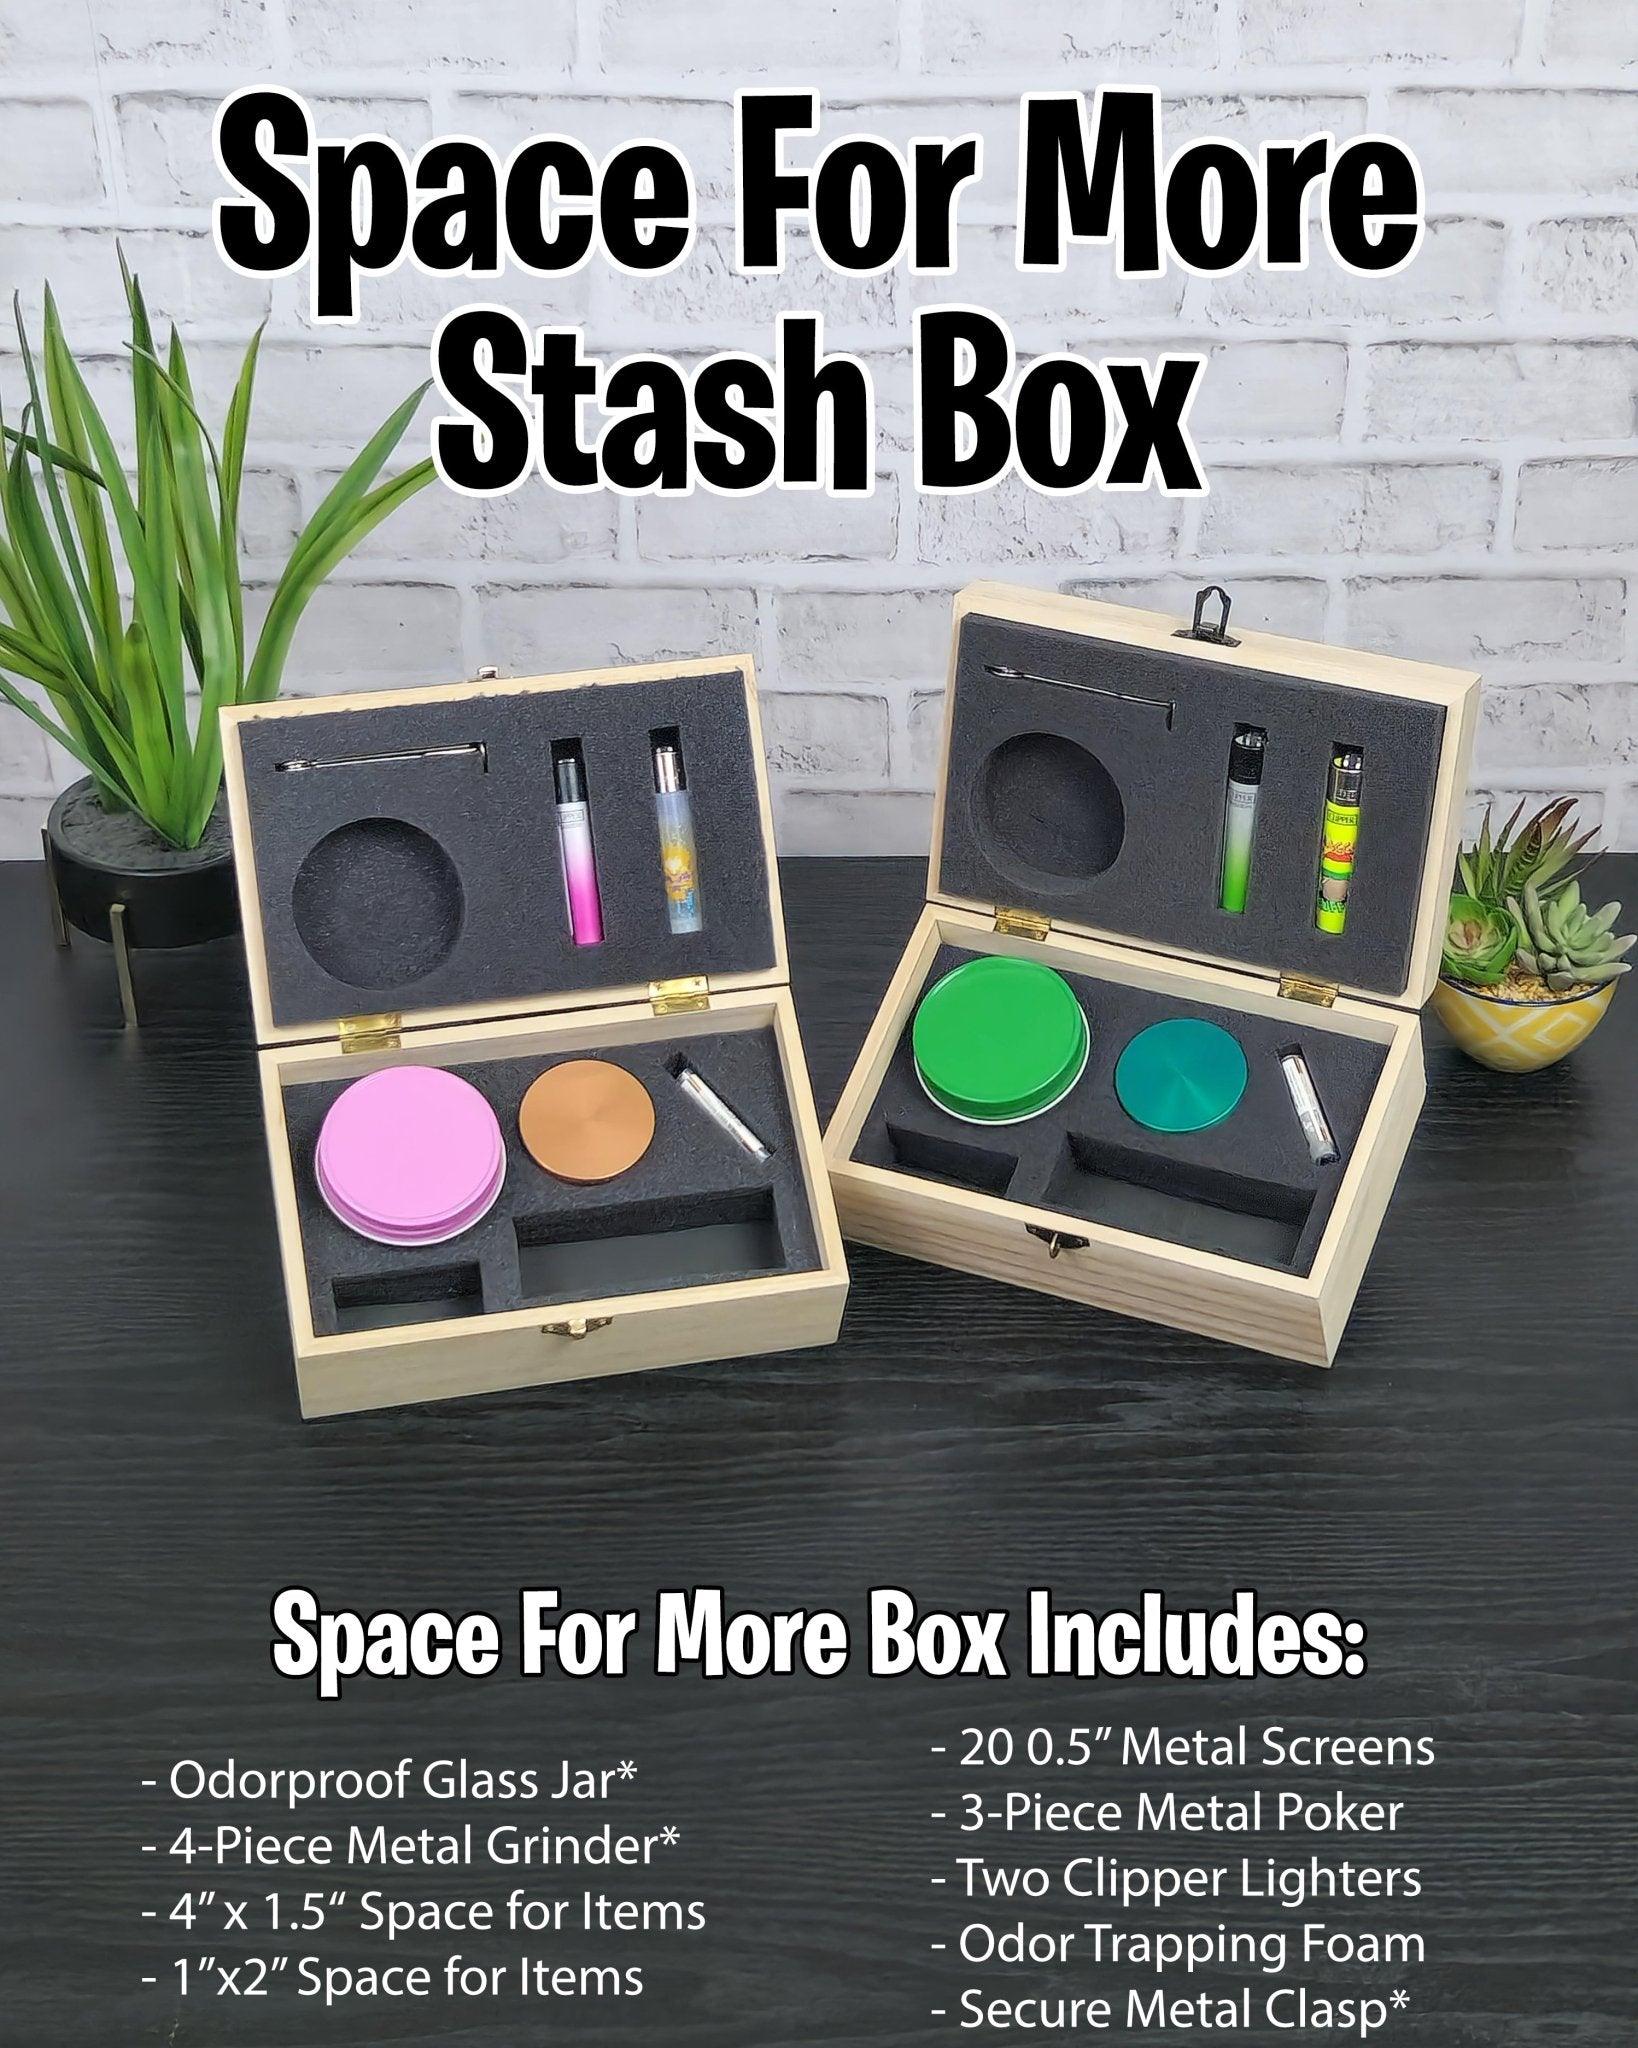 Space For More Stash Box - The Bud Butler